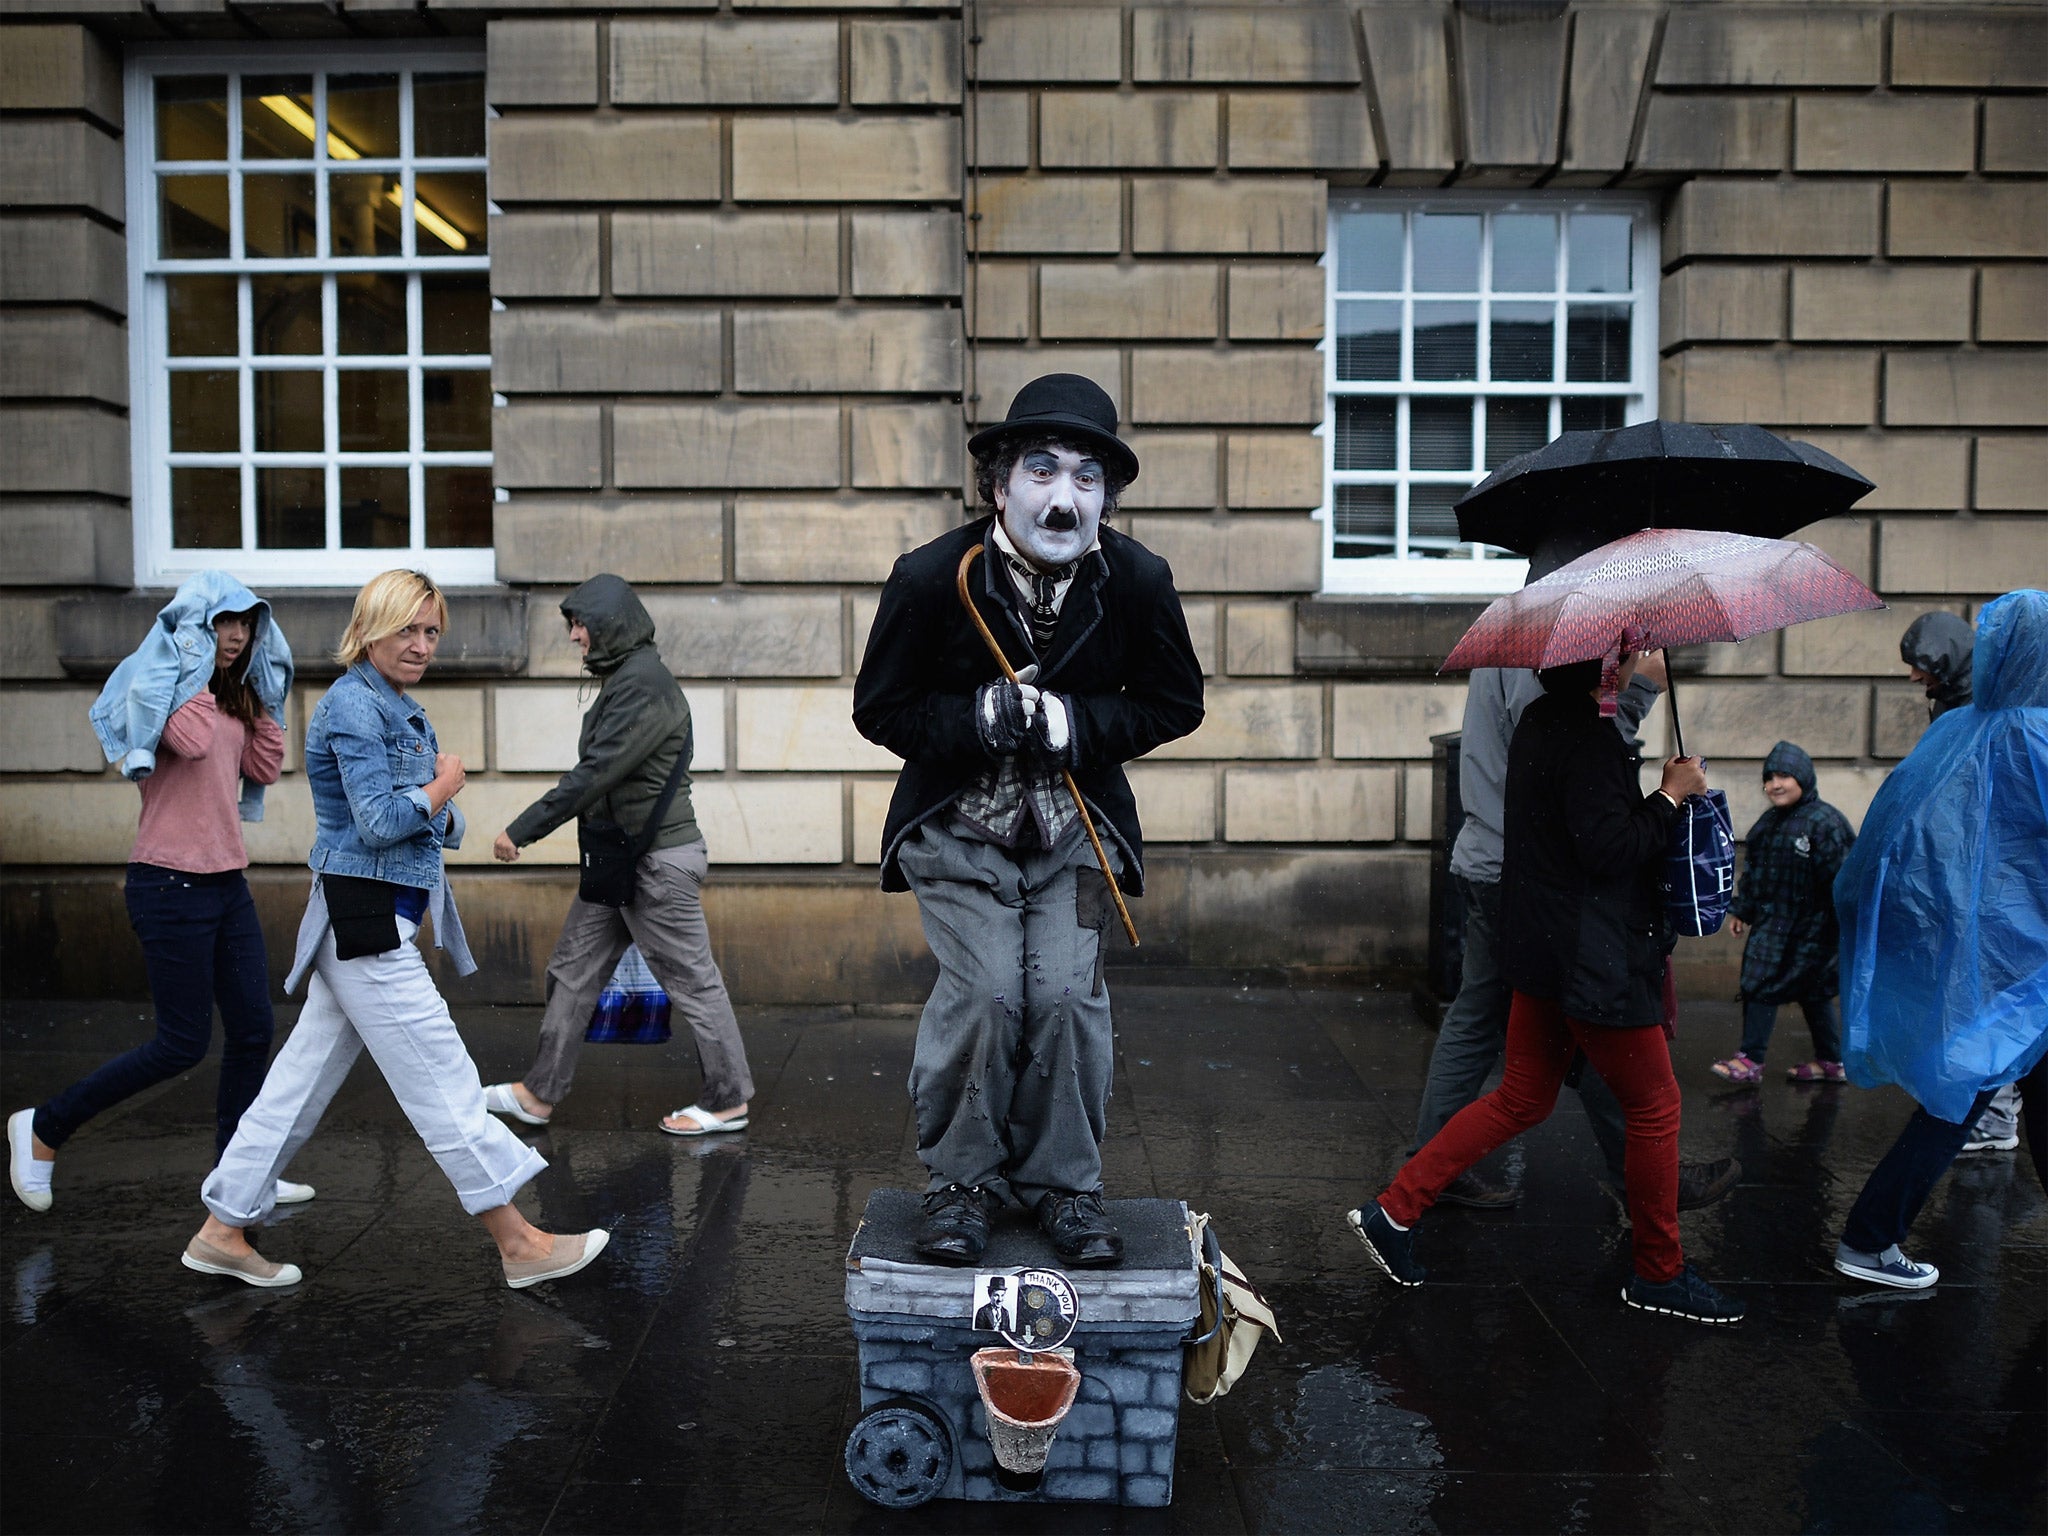 The world’s biggest arts gathering attracts street performers, while more than 2,000 shows compete for attention